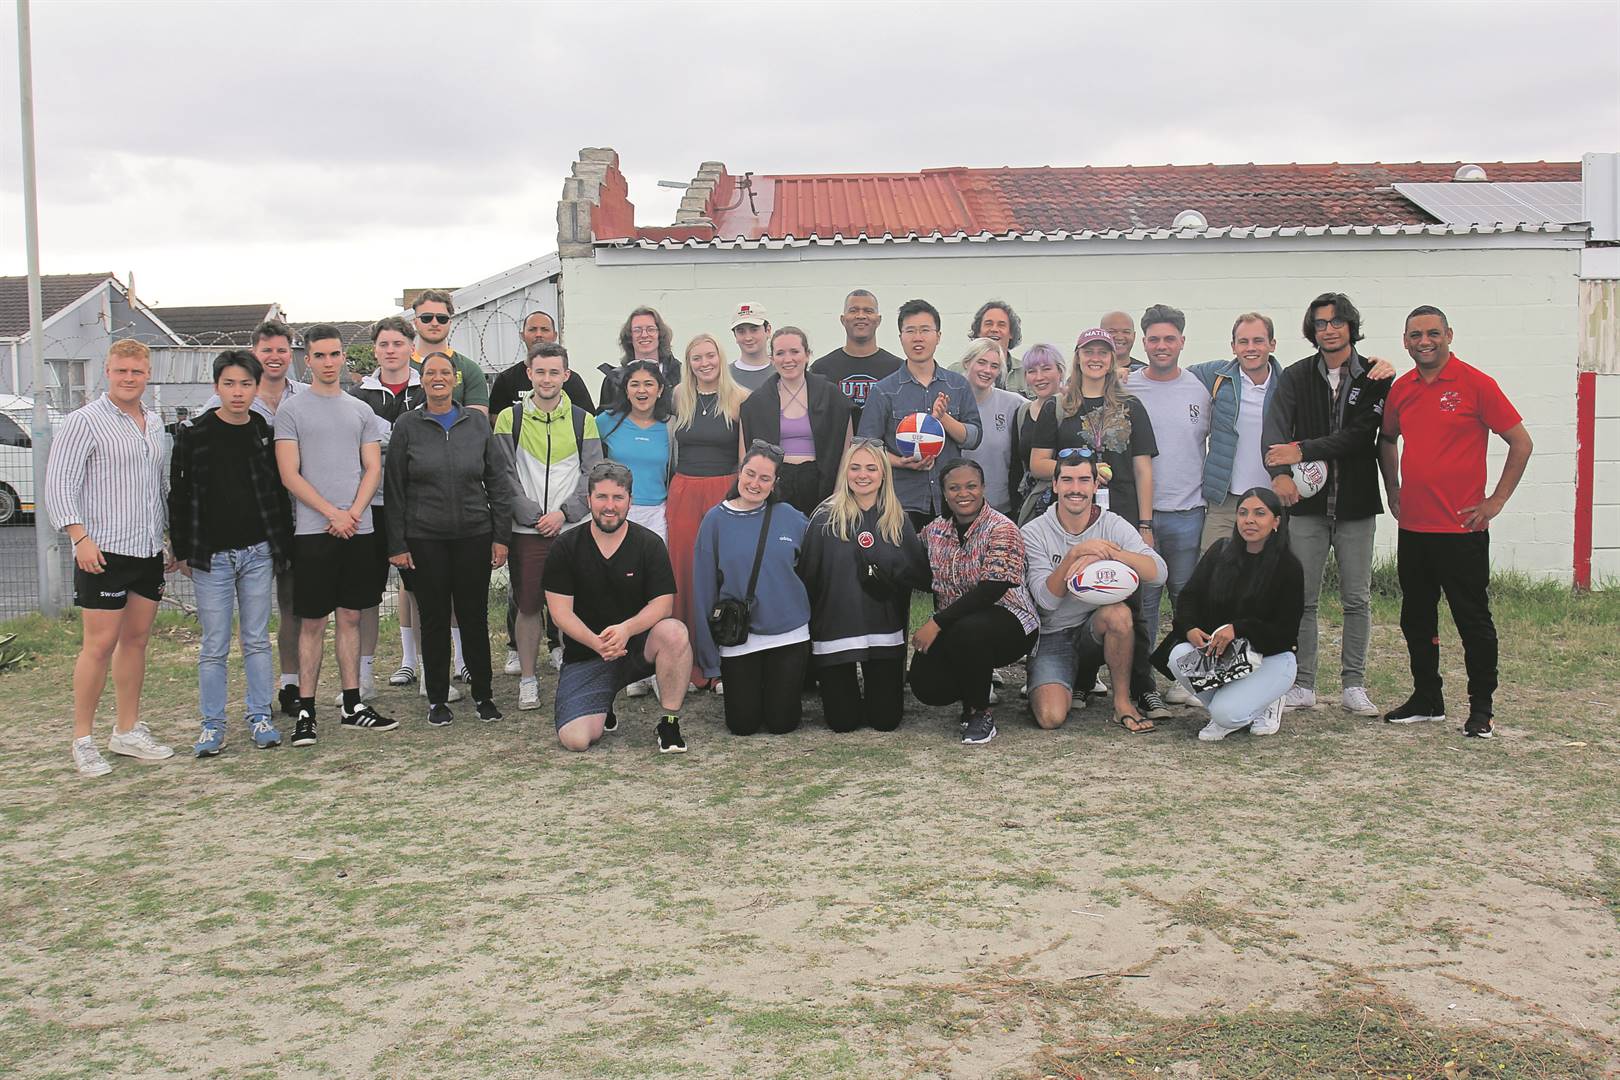 A group of students from Stellenbosch University and Cardiff University in Wales visited Napier Close Park on Thursday 9th March to see the work of the Unchain the Plain Foundation in action.  PHOTO: Samantha Lee-Jacobs